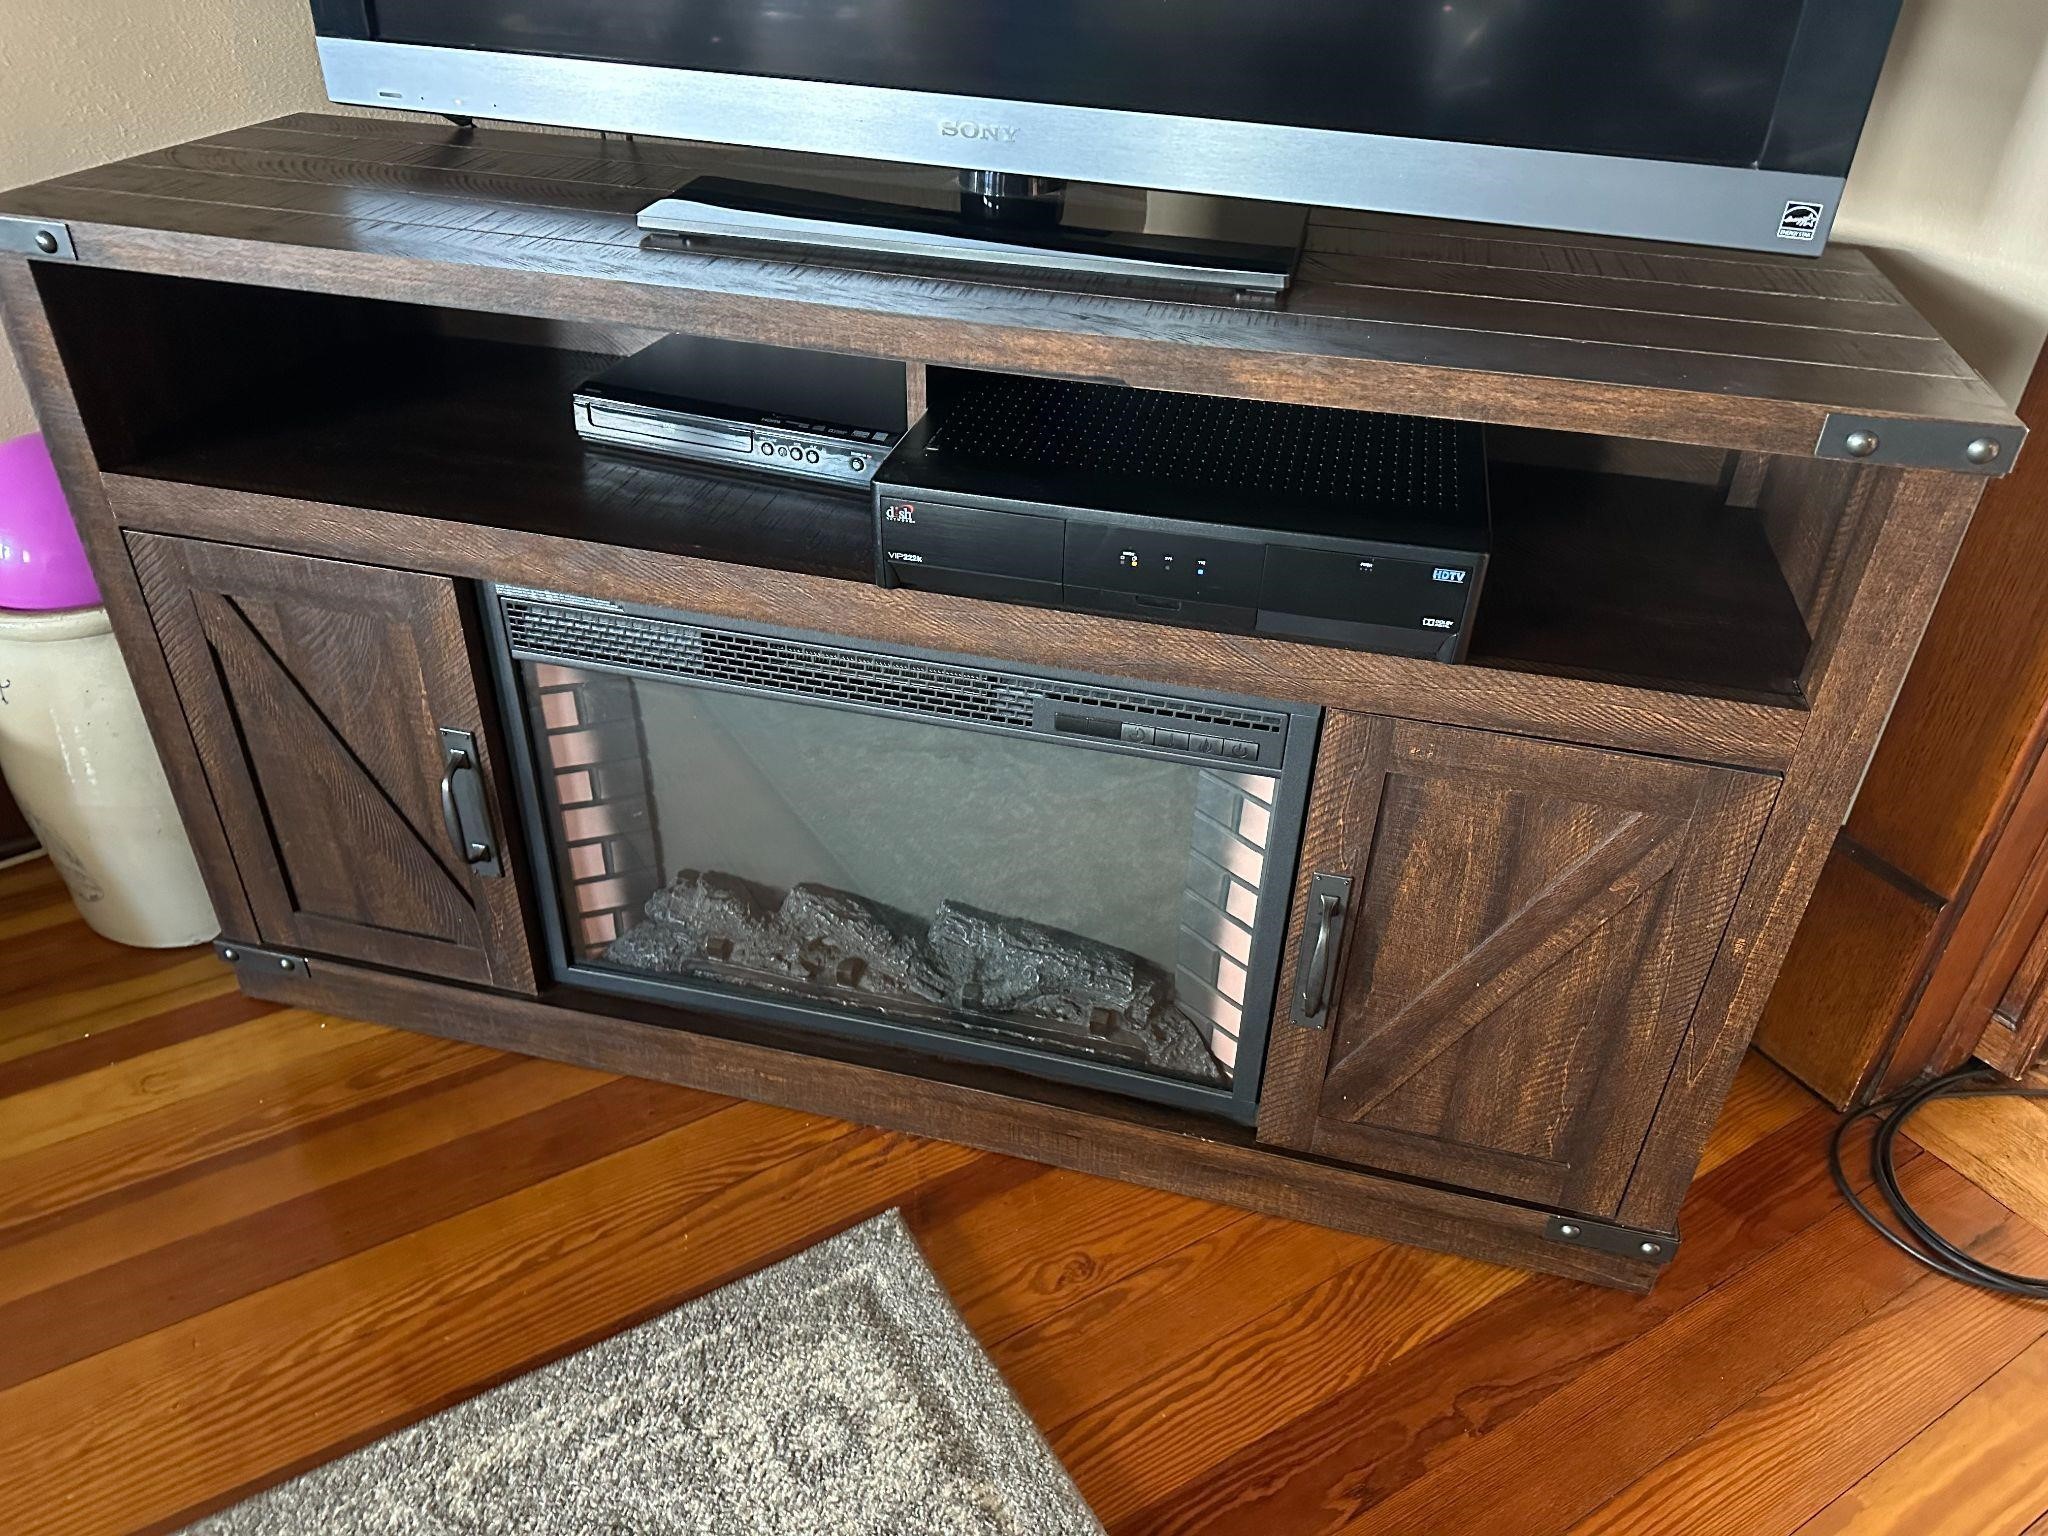 TV Stand/Electric Fireplace w/ Remote